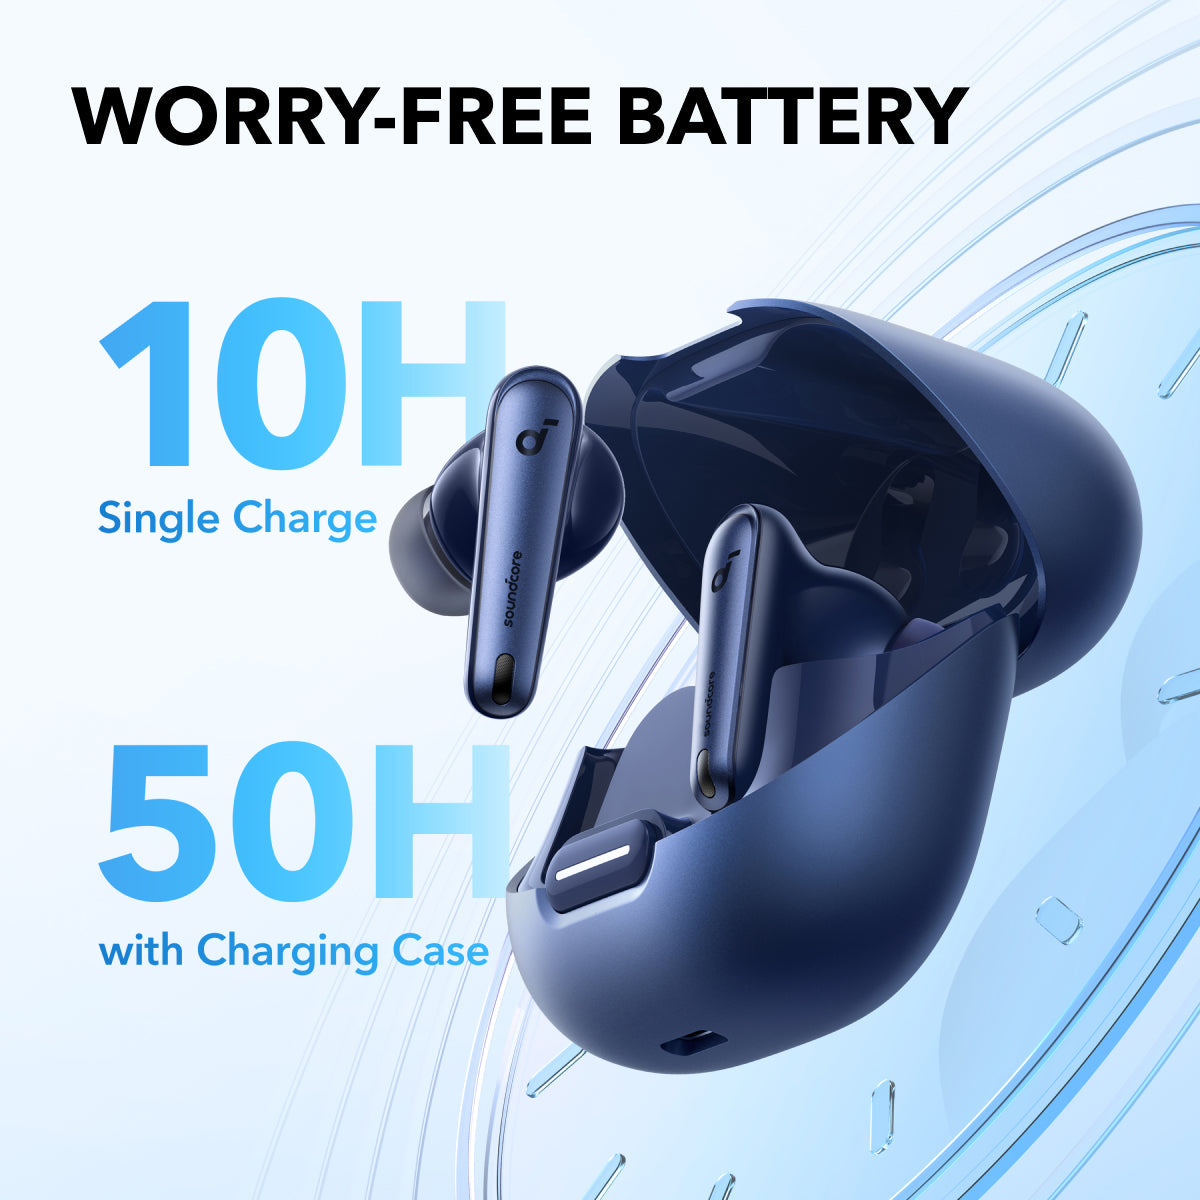 Liberty 4 NC - All-New True-Wireless Noise Canceling Earbuds